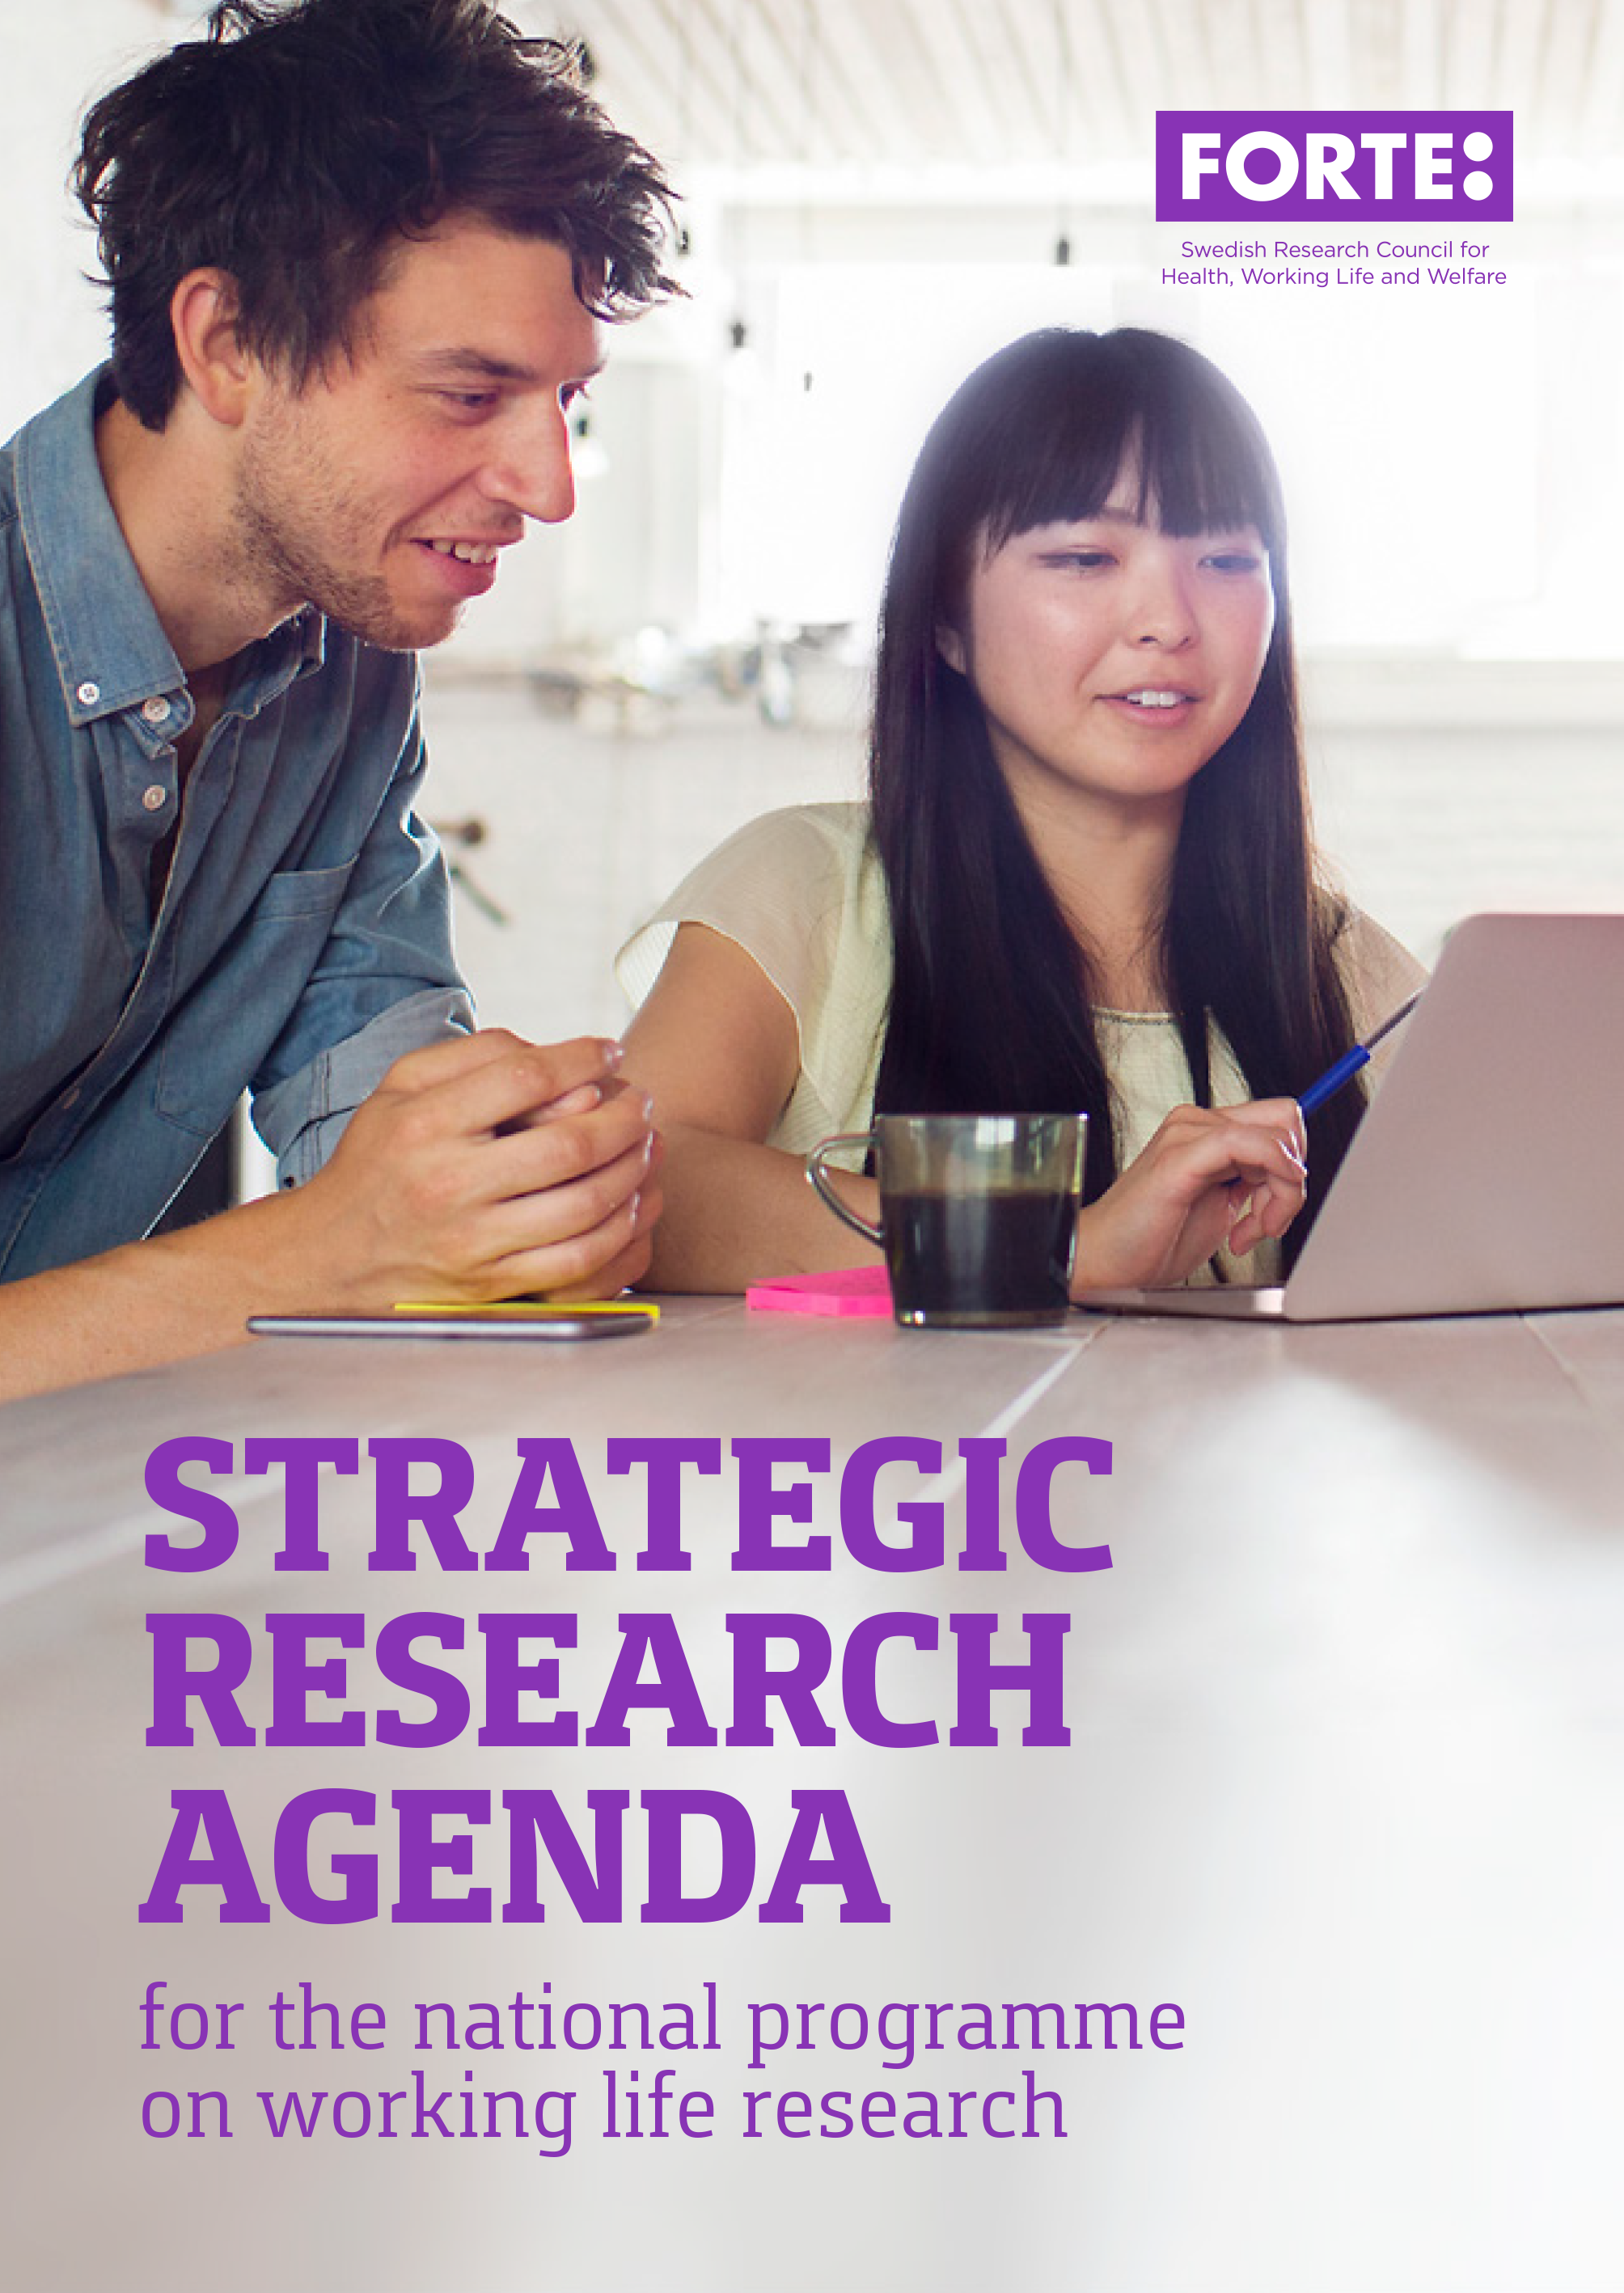 Strategic research agenda for the national programme on working life